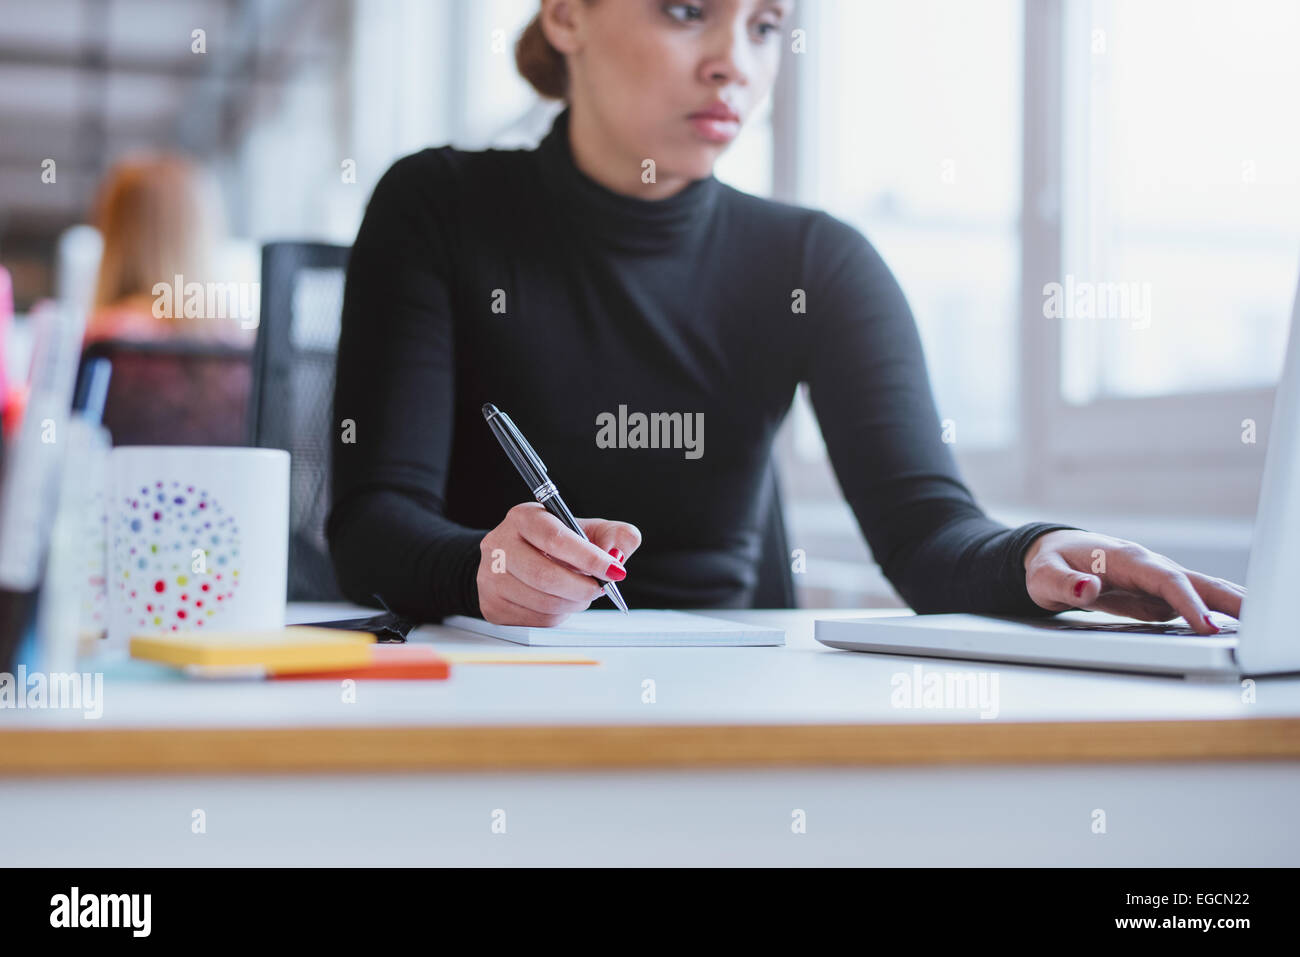 Young woman taking notes from laptop. Female executive working her desk using laptop and writing notes. Stock Photo